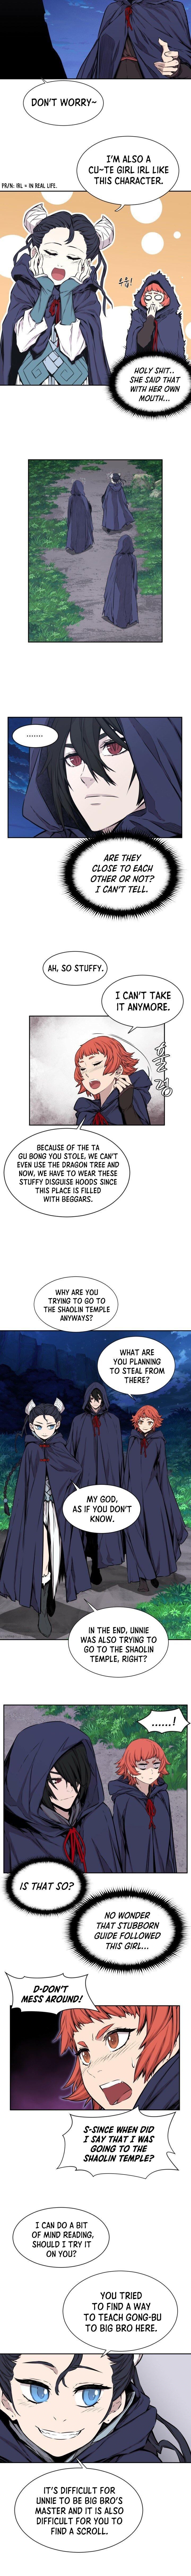 Legend of Mir: Gold Armored Dragon - Chapter 14 Page 4